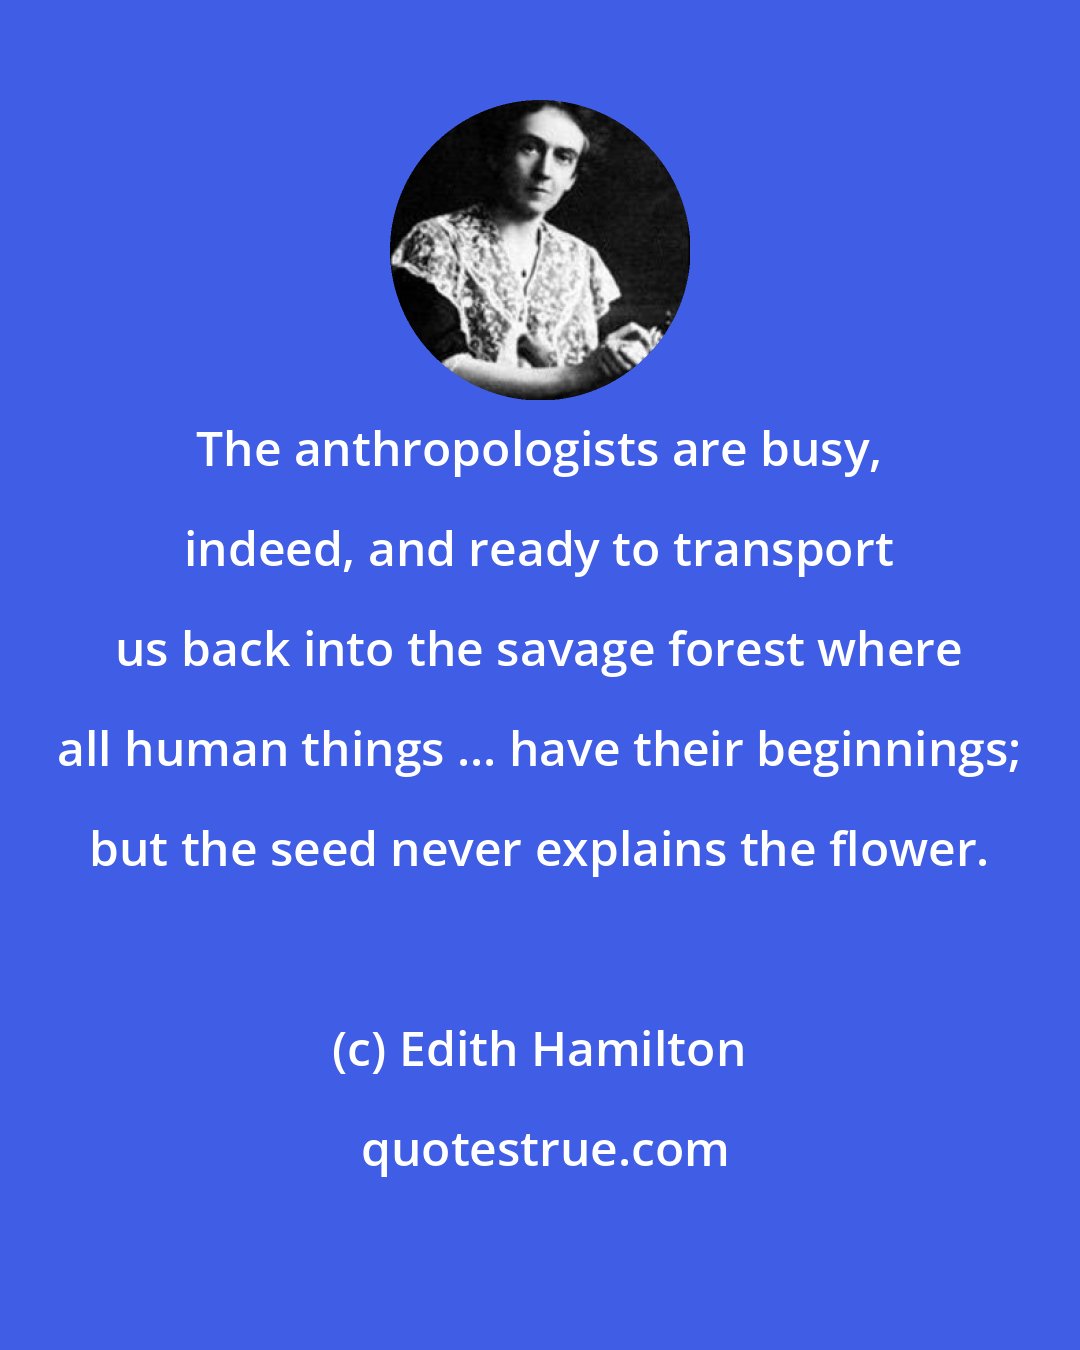 Edith Hamilton: The anthropologists are busy, indeed, and ready to transport us back into the savage forest where all human things ... have their beginnings; but the seed never explains the flower.